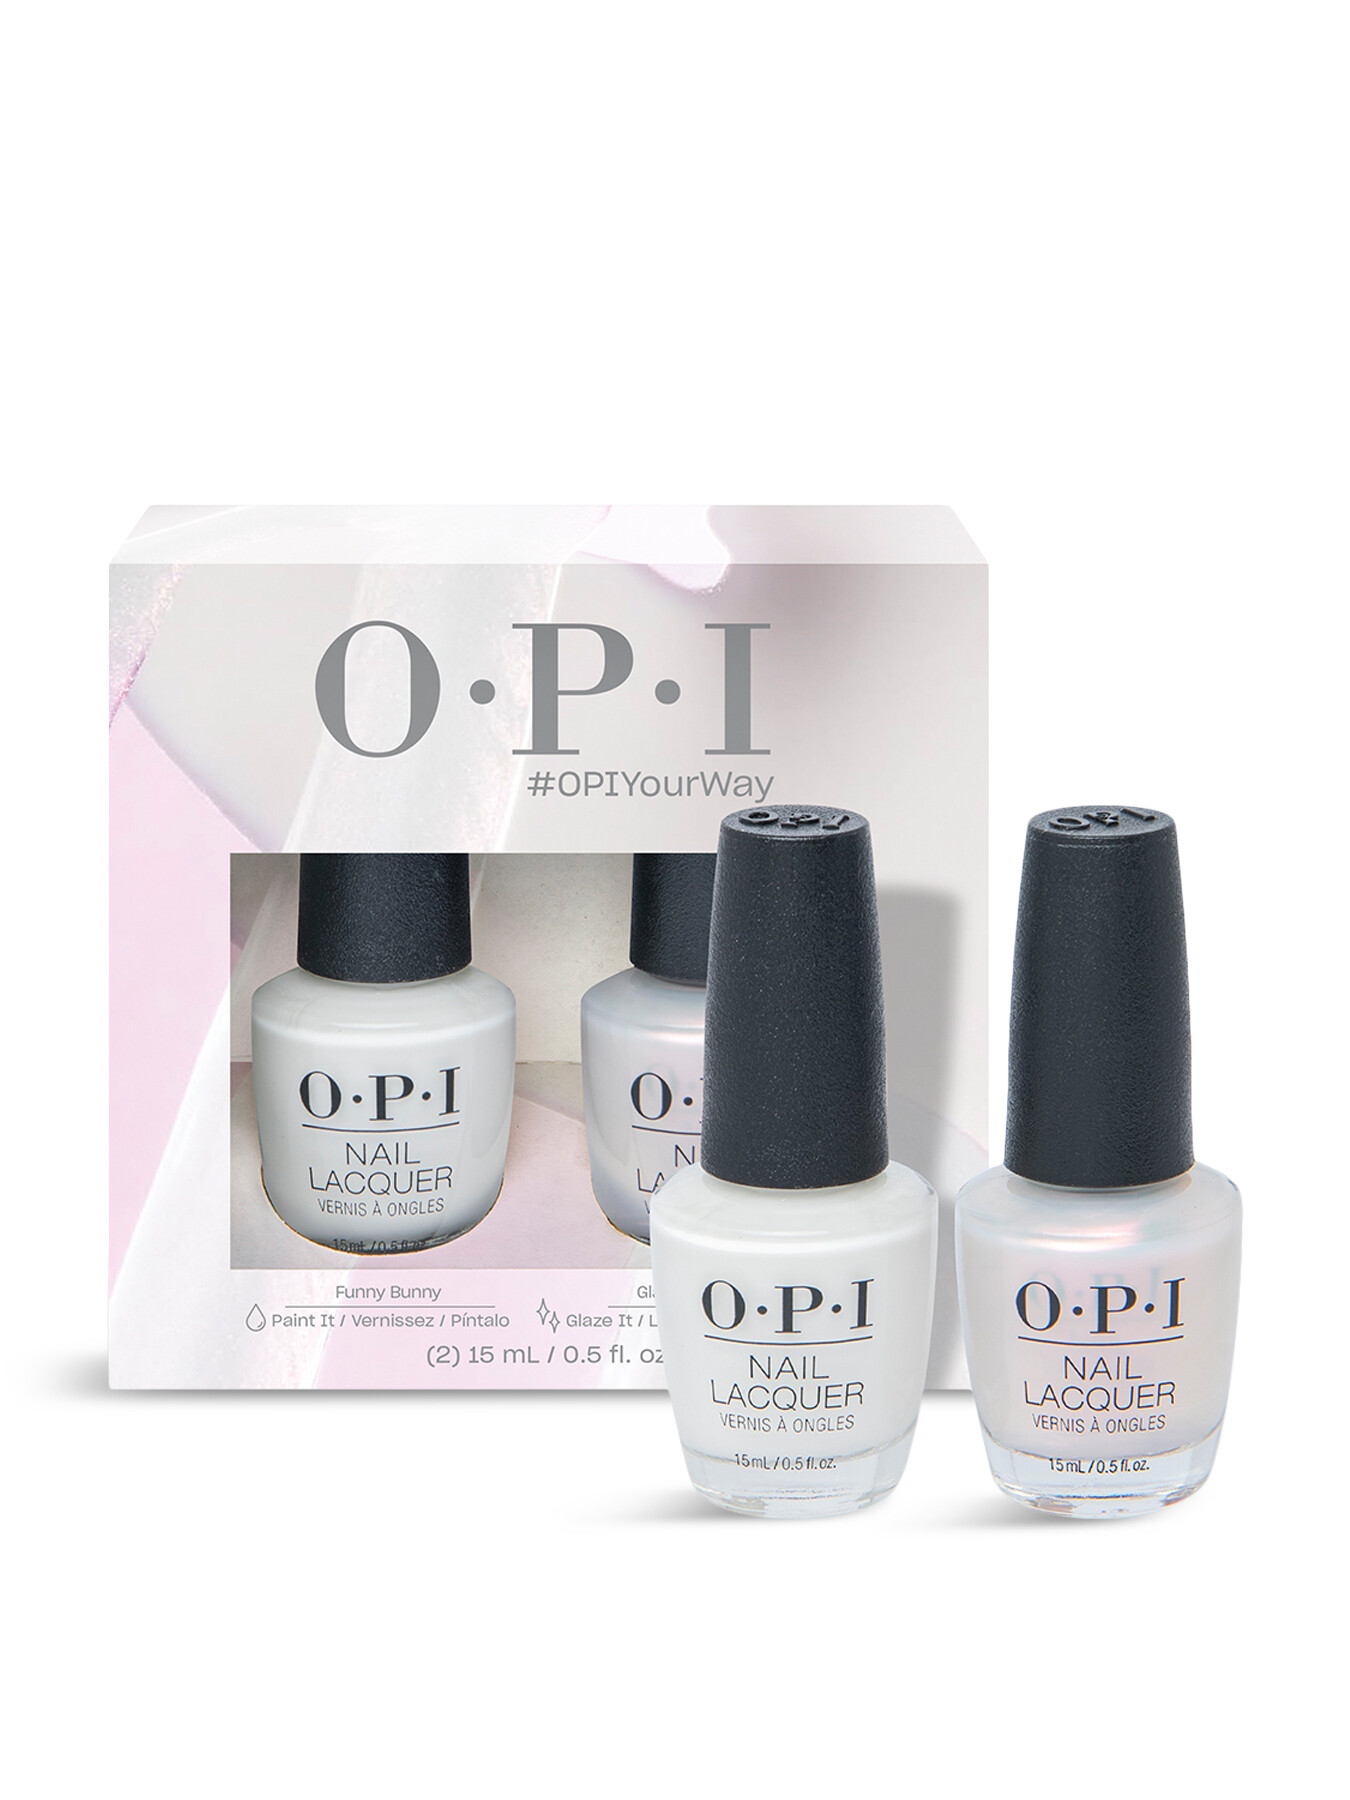 Opi Polish Duo Pack In White